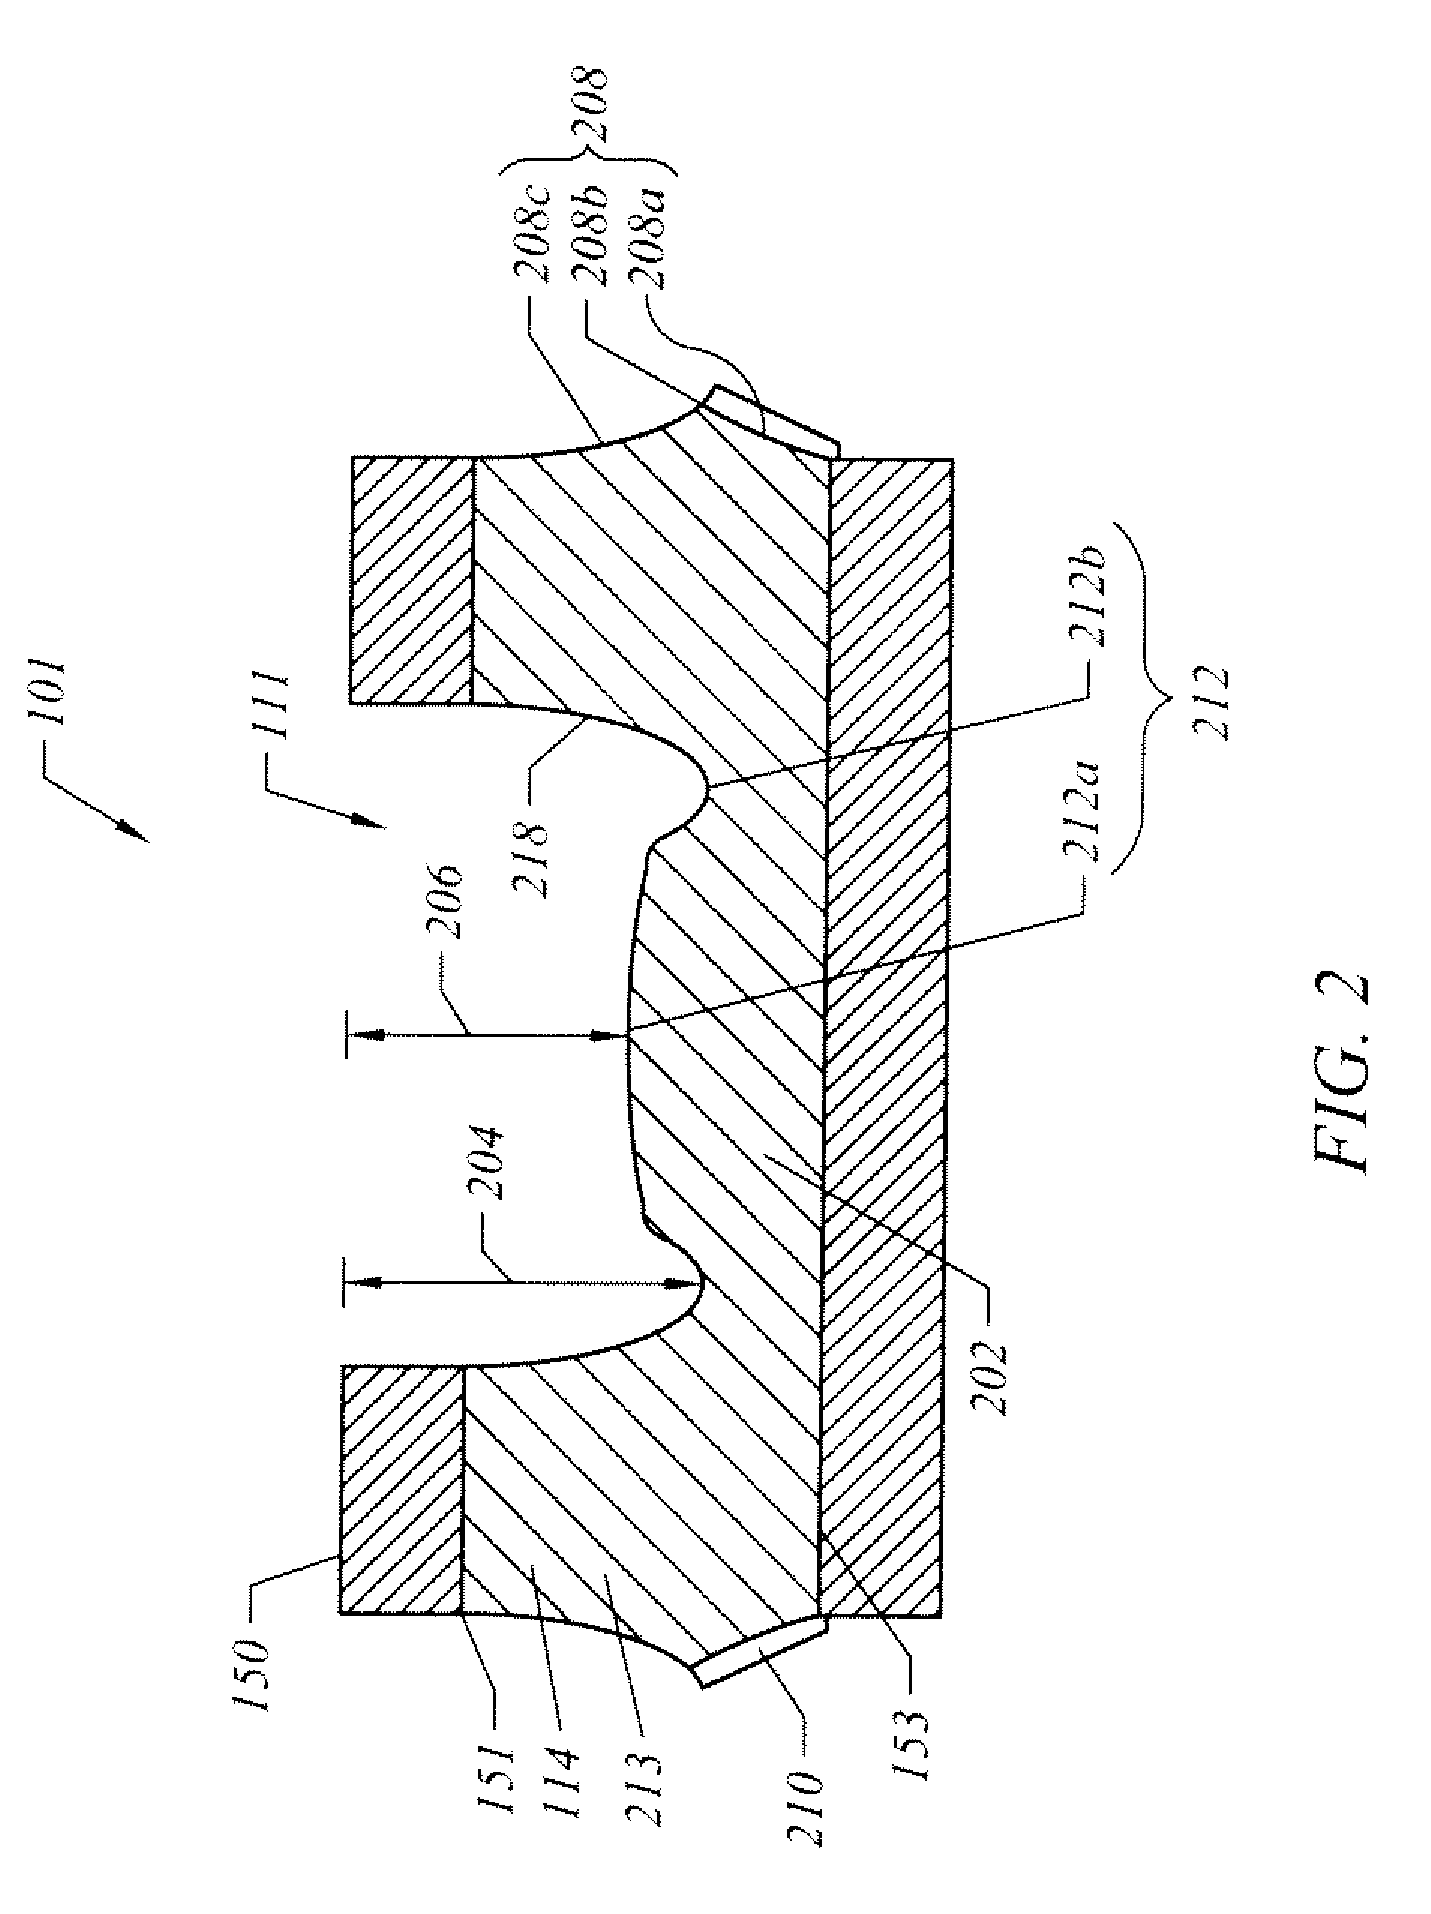 Advanced quad flat no lead chip package having marking and corner lead features and manufacturing methods thereof